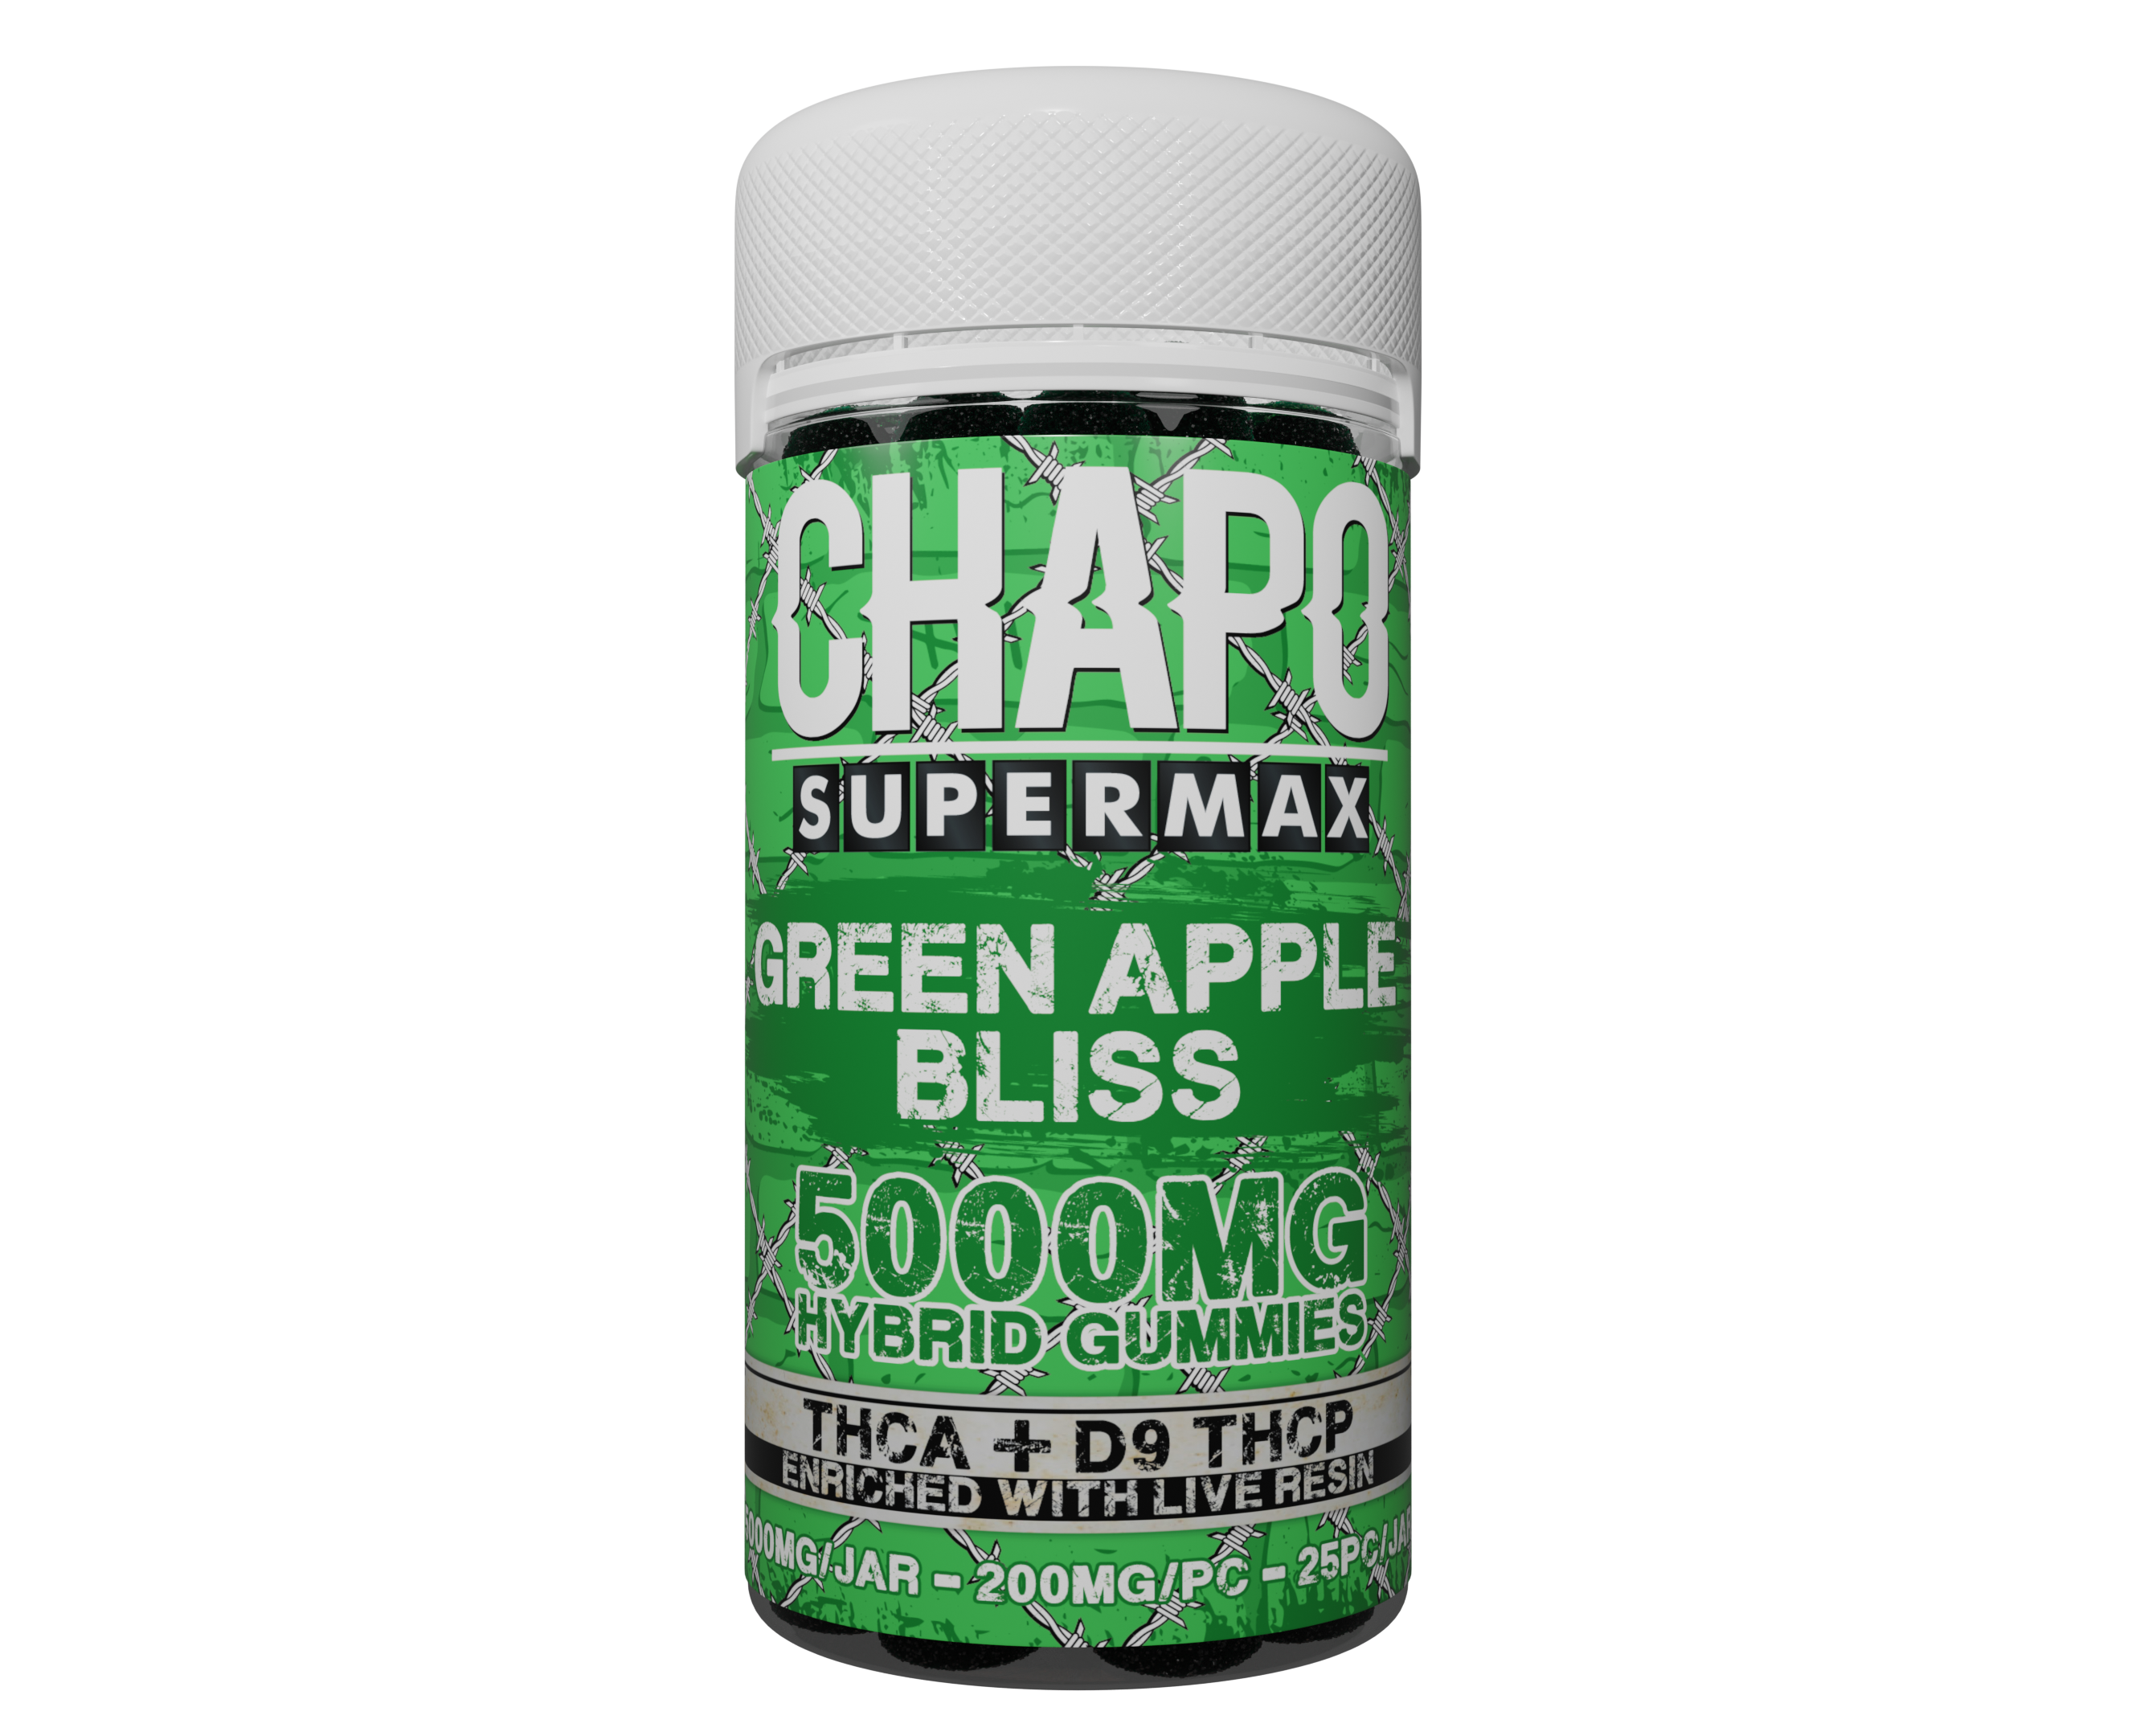 Chapo Supermax THC-A + D9 THC-P Enriched with Live Resin 5000mg Gummies 6 pack - Vape Masterz